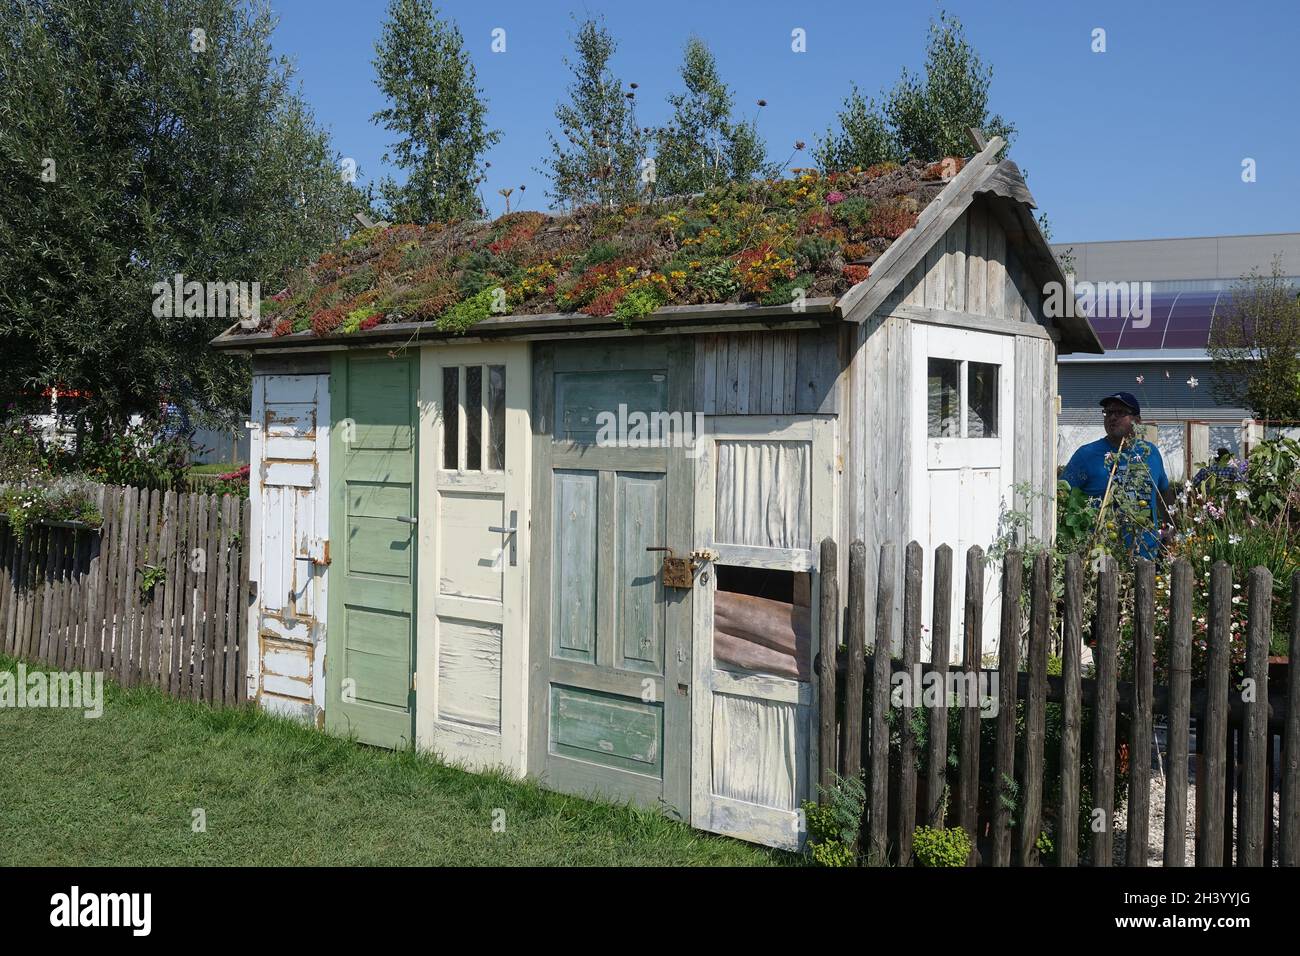 Garden shed with green roof Stock Photo